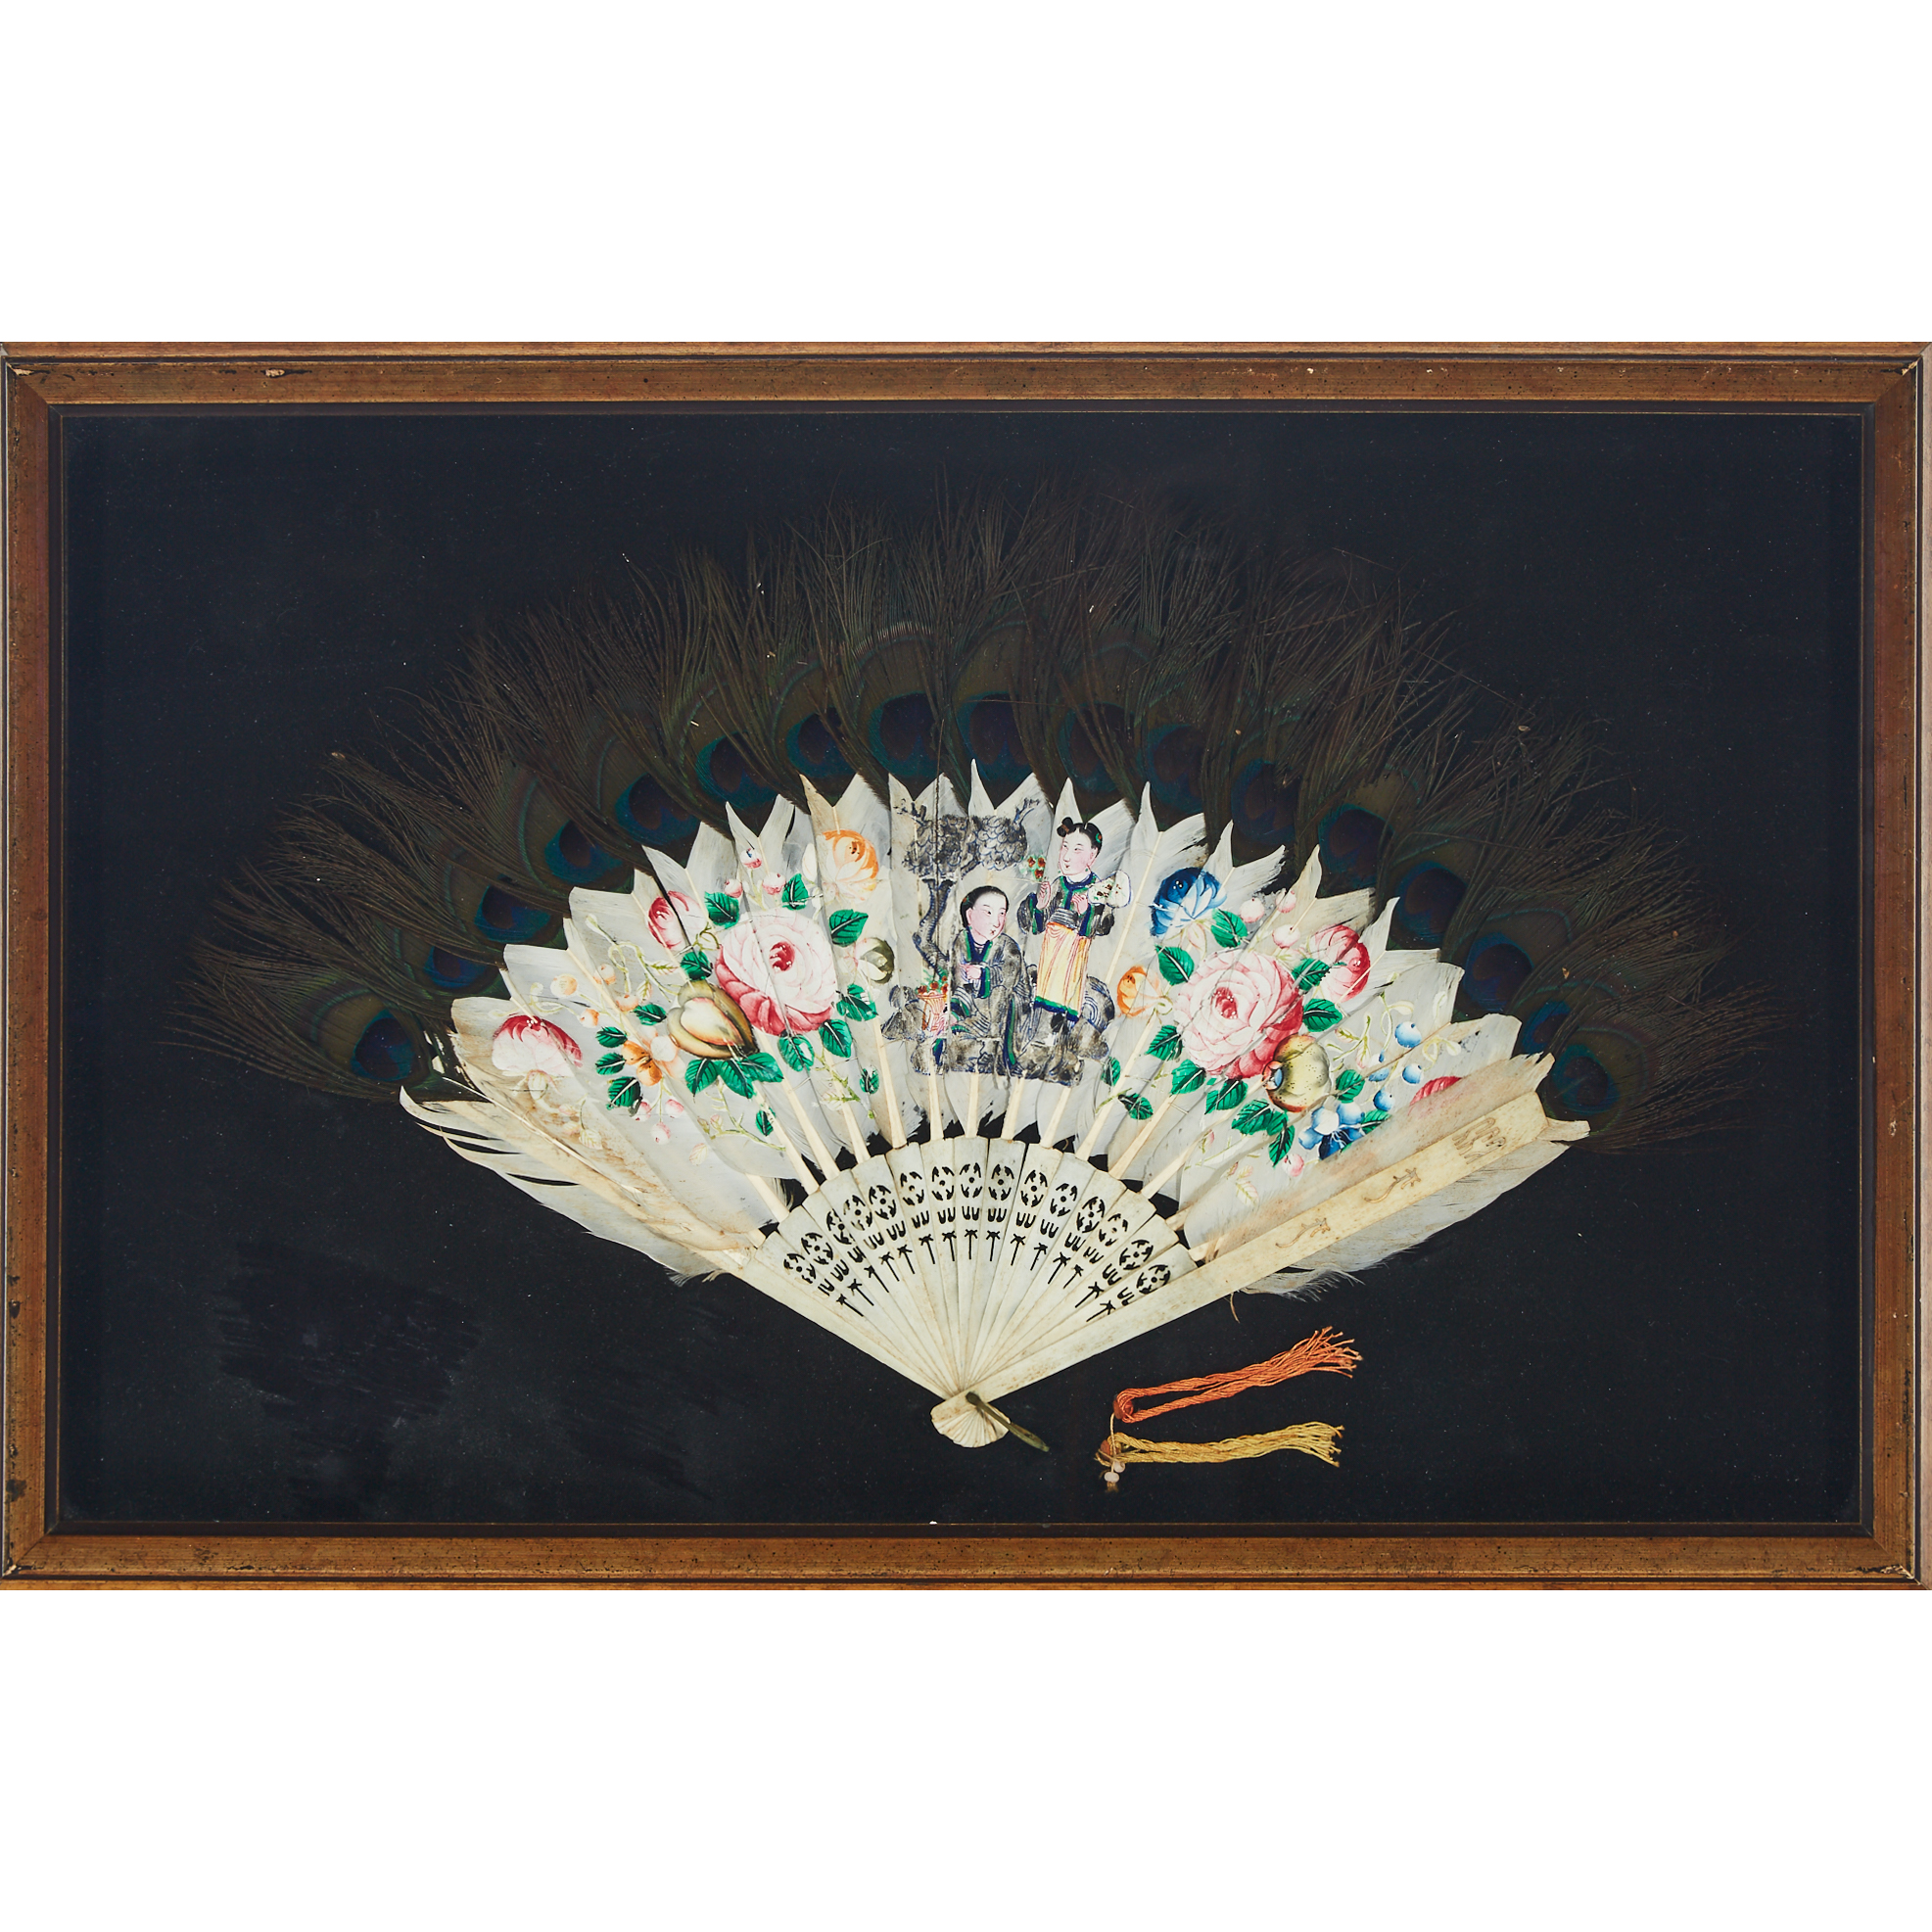 A Chinese Export Peacock Feather and Bone Fan, Early 20th Century